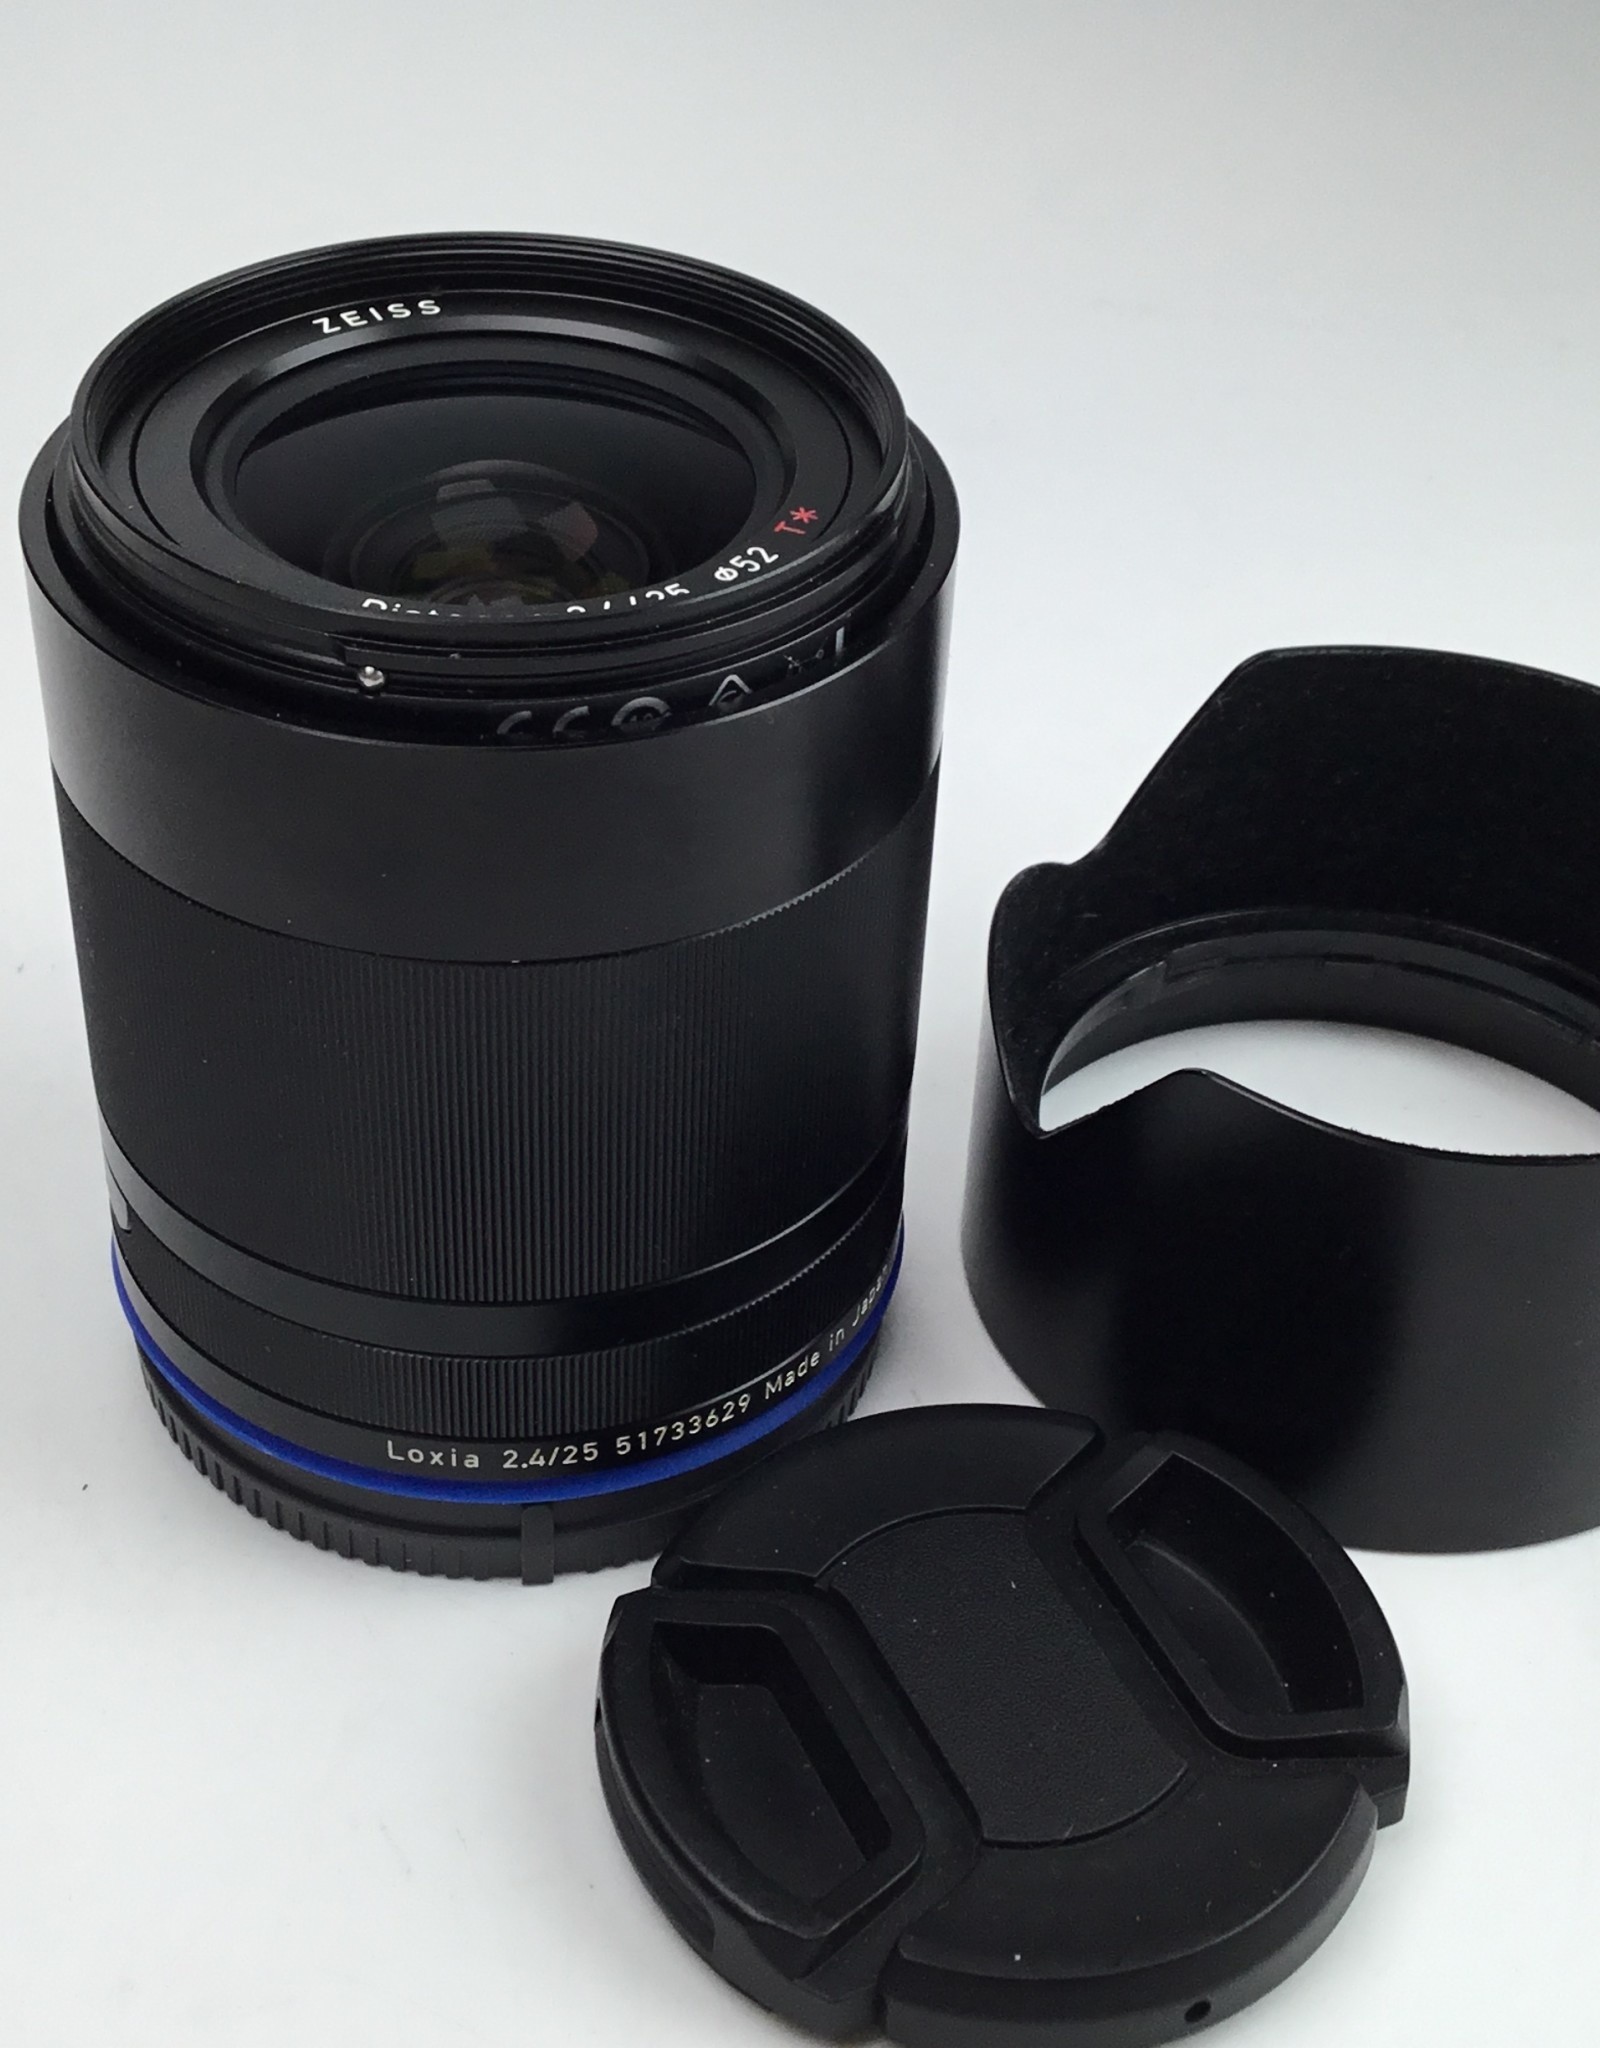 ZEISS Zeiss Loxia Distagon 25mm f2.4 Lens for Sony E Used Good